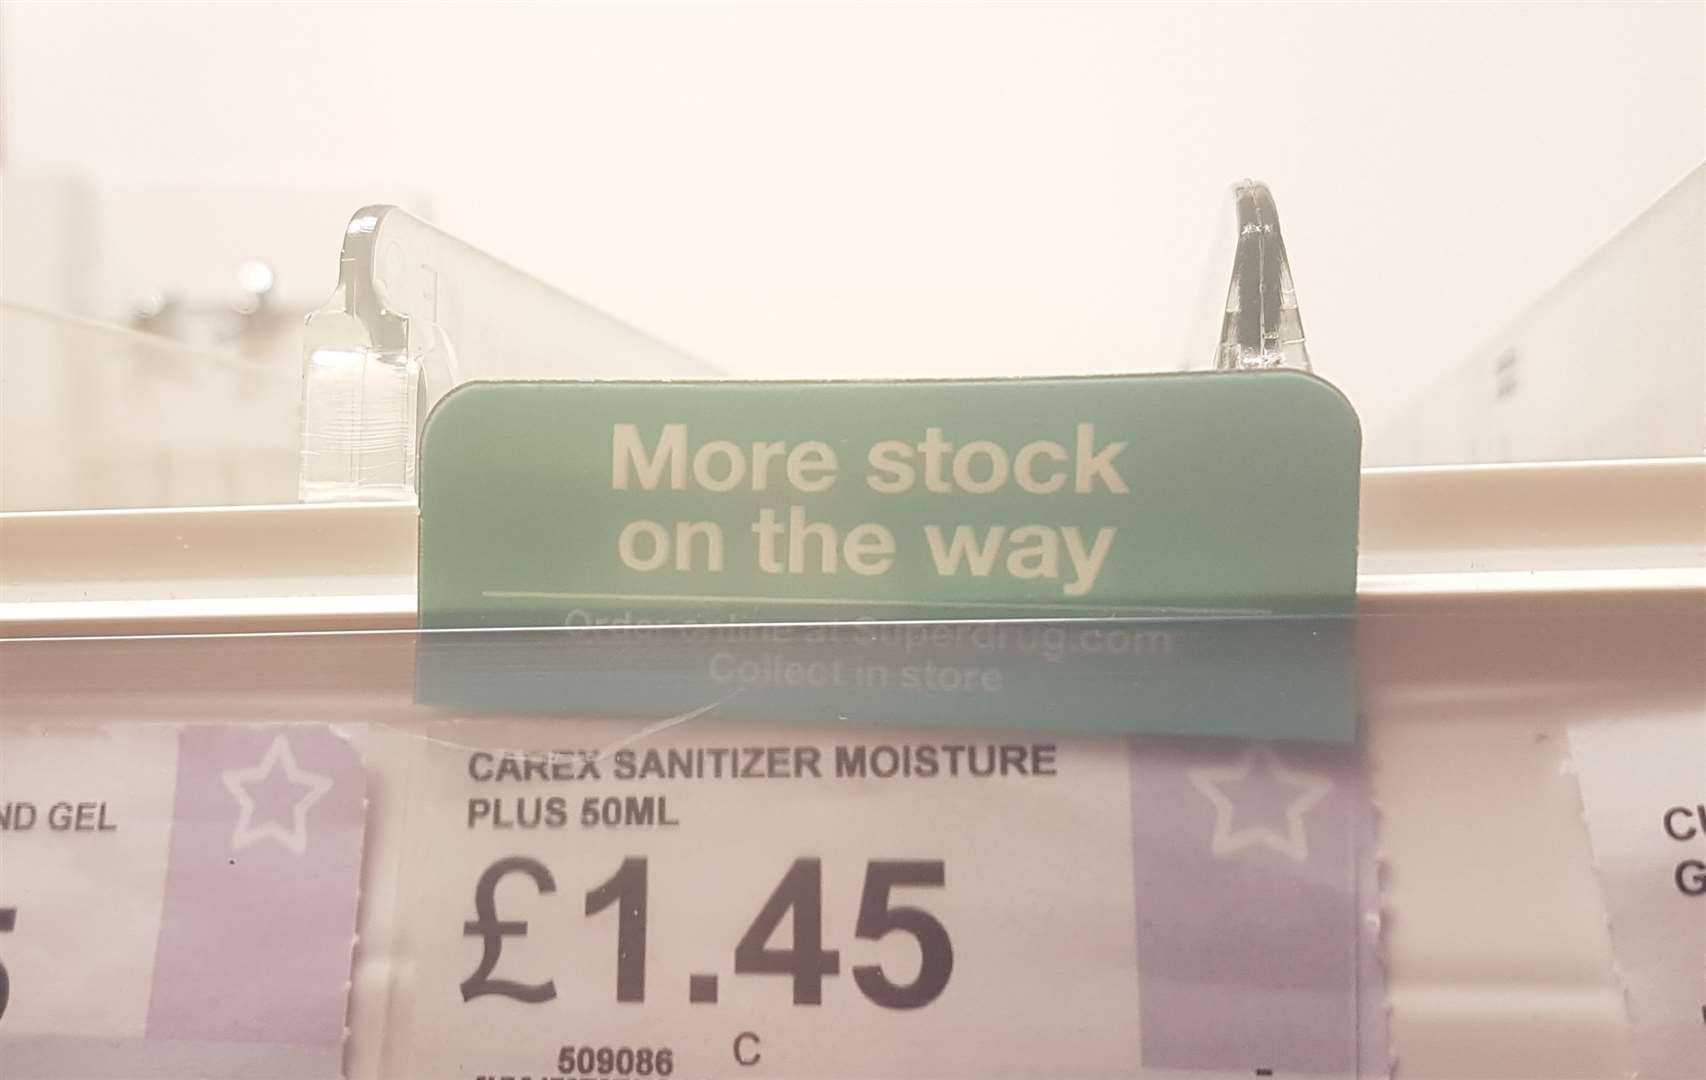 More stock is promised to soon arrive at Canterbury's Superdrug